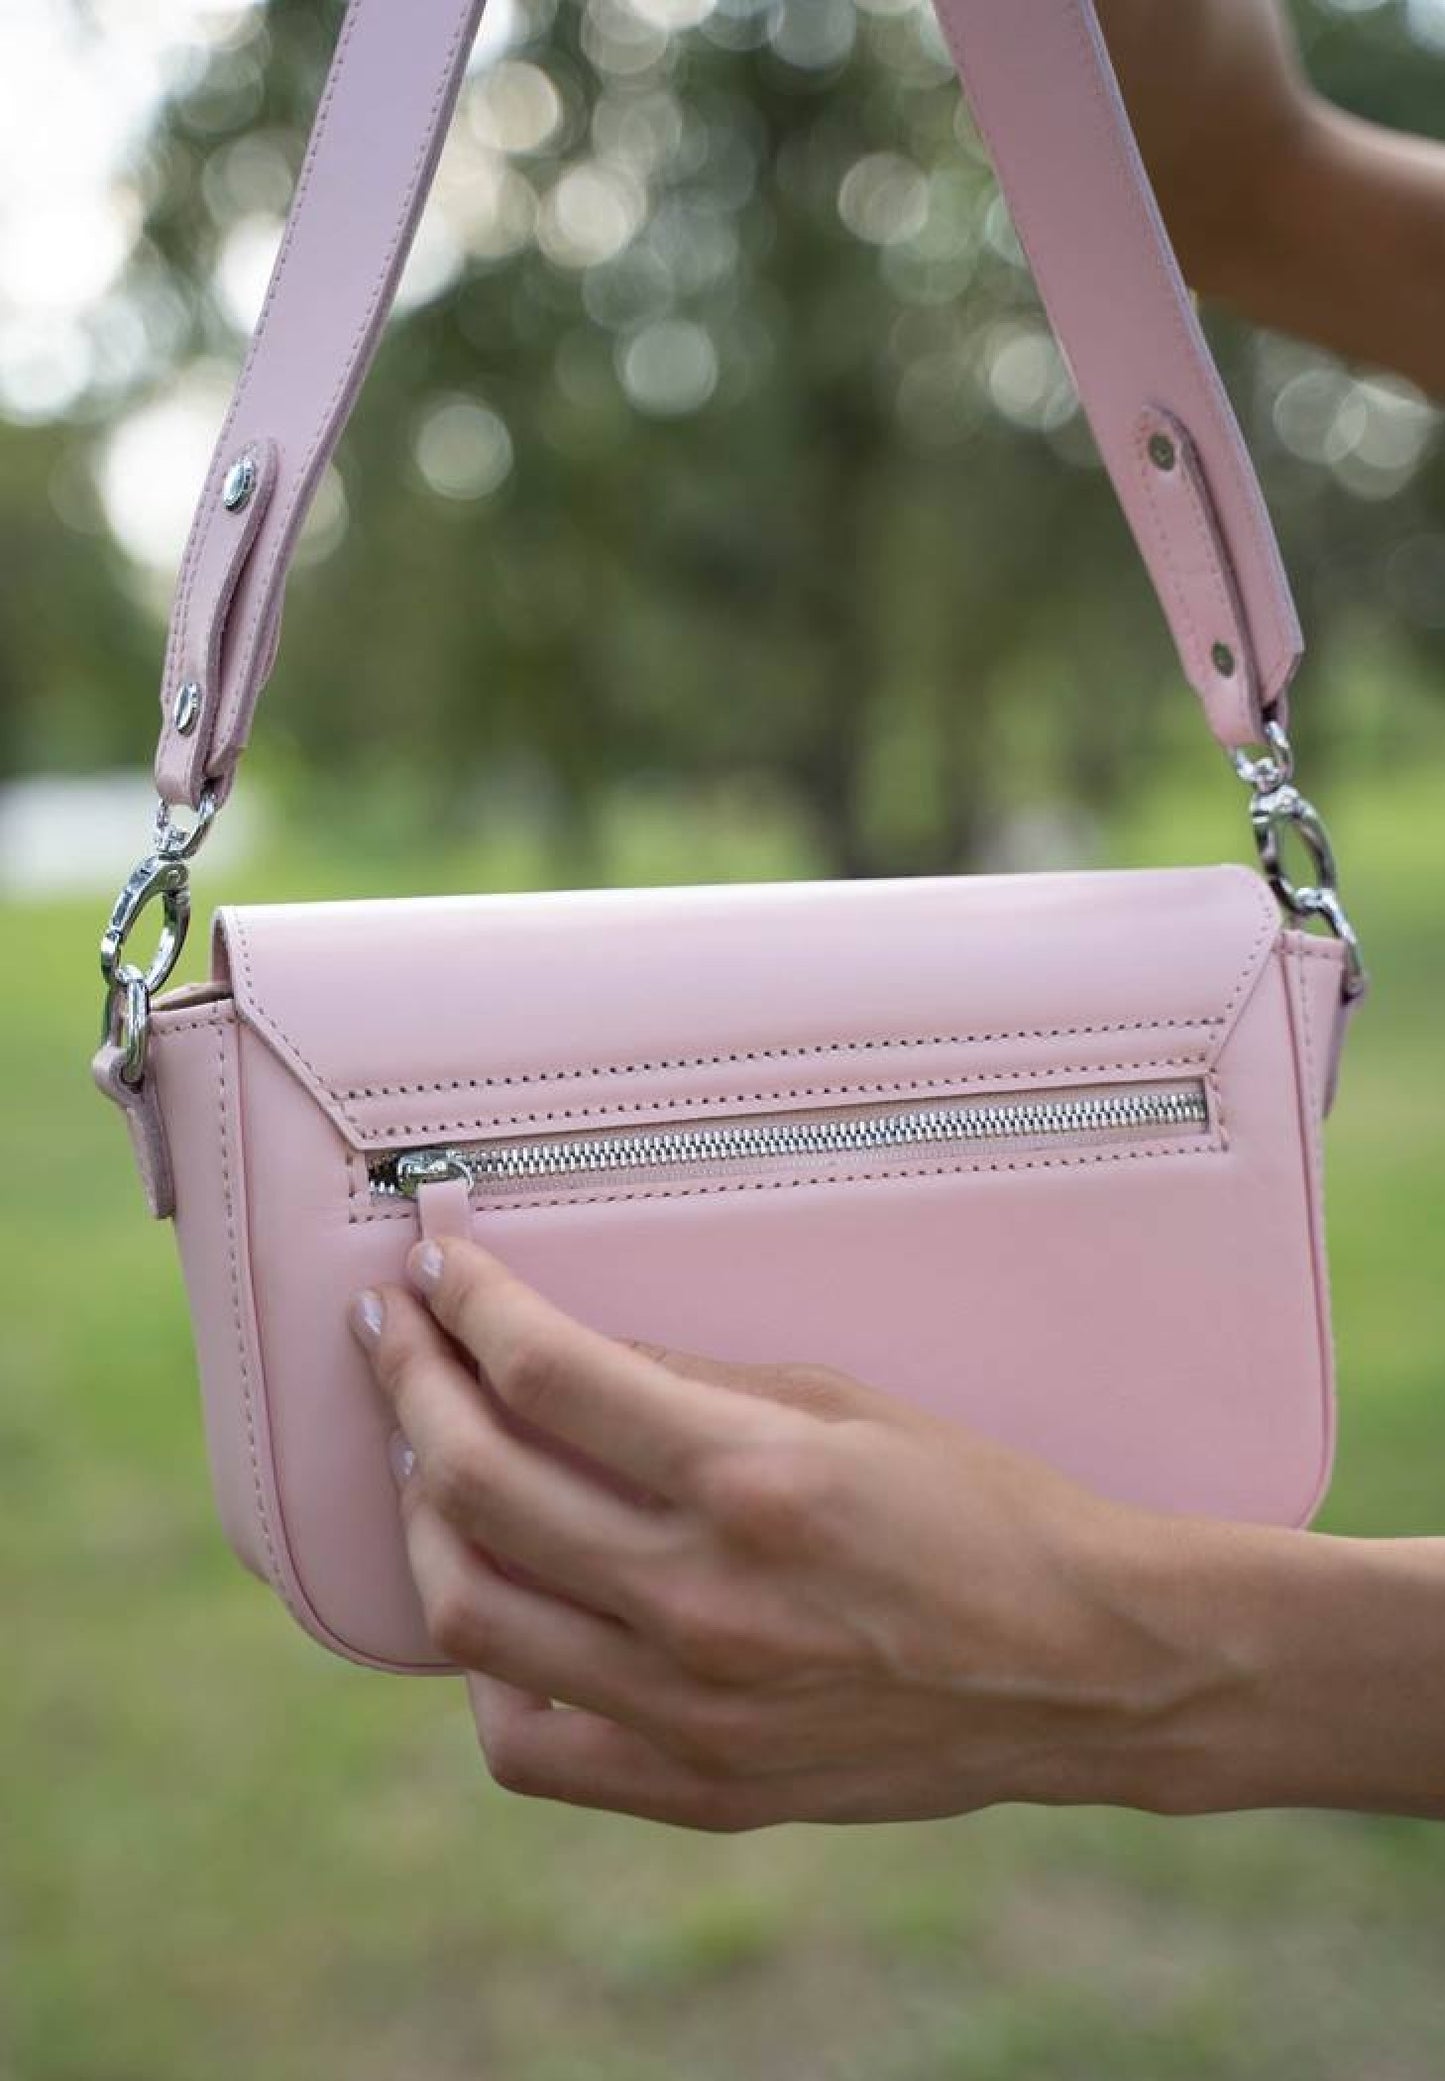 Molly leather bag for women in pink color